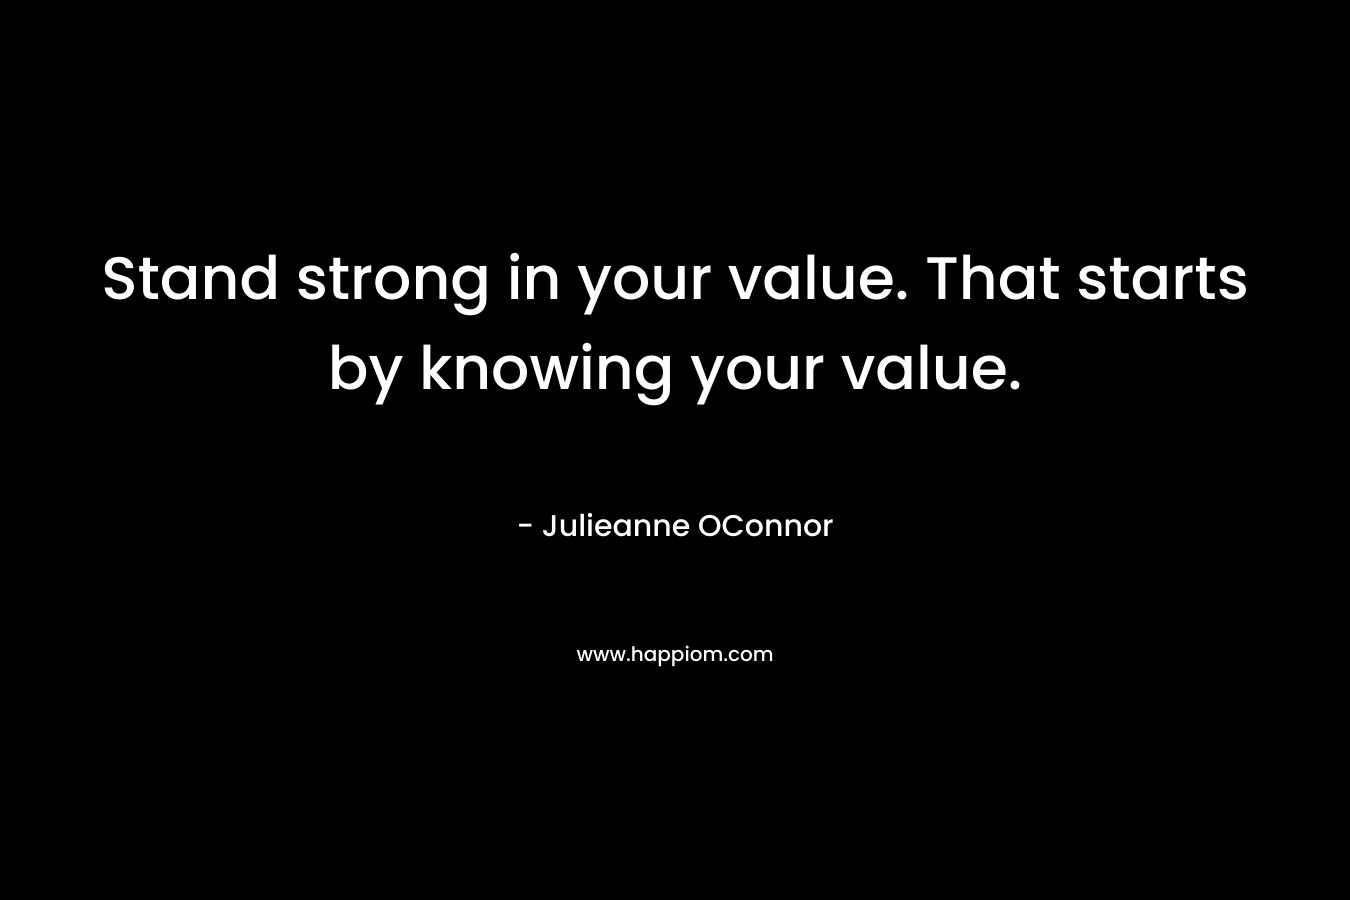 Stand strong in your value. That starts by knowing your value.